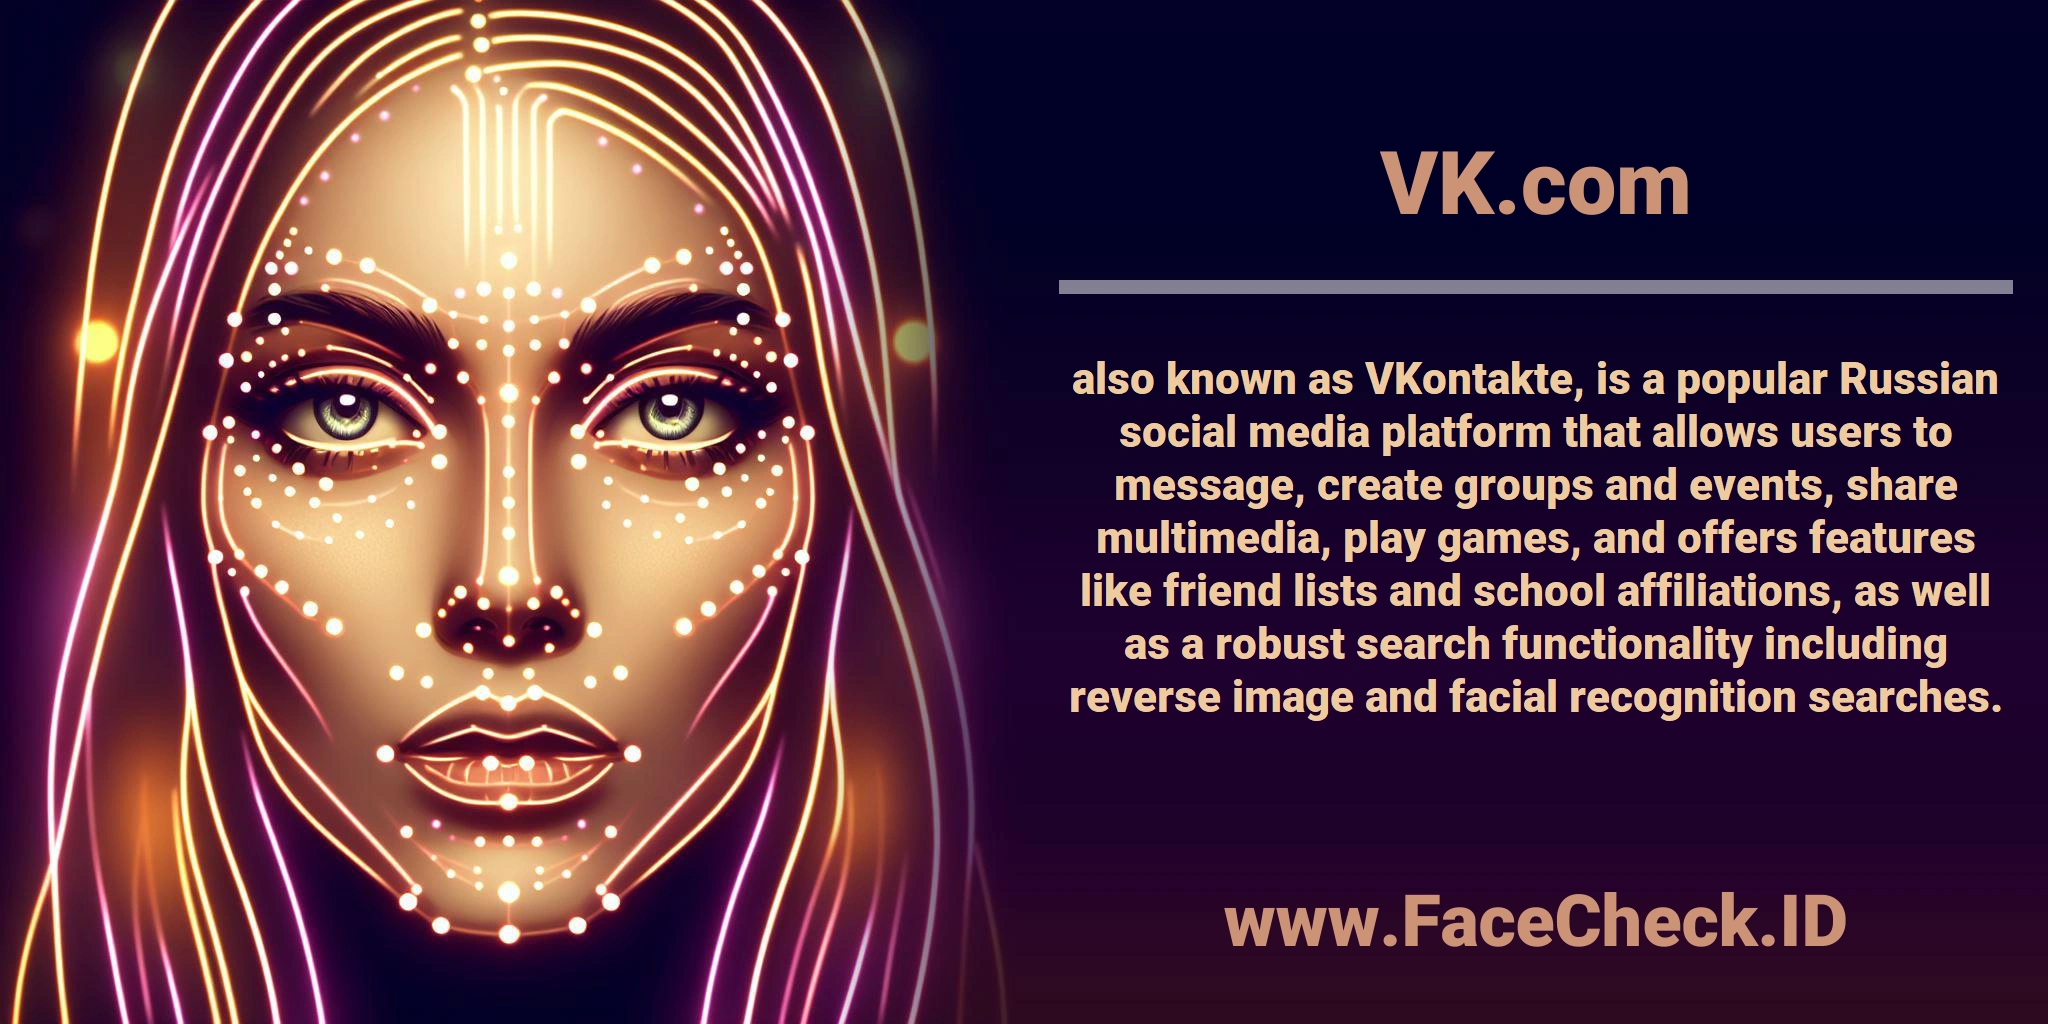 <b>VK.com</b> also known as VKontakte, is a popular Russian social media platform that allows users to message, create groups and events, share multimedia, play games, and offers features like friend lists and school affiliations, as well as a robust search functionality including reverse image and facial recognition searches.